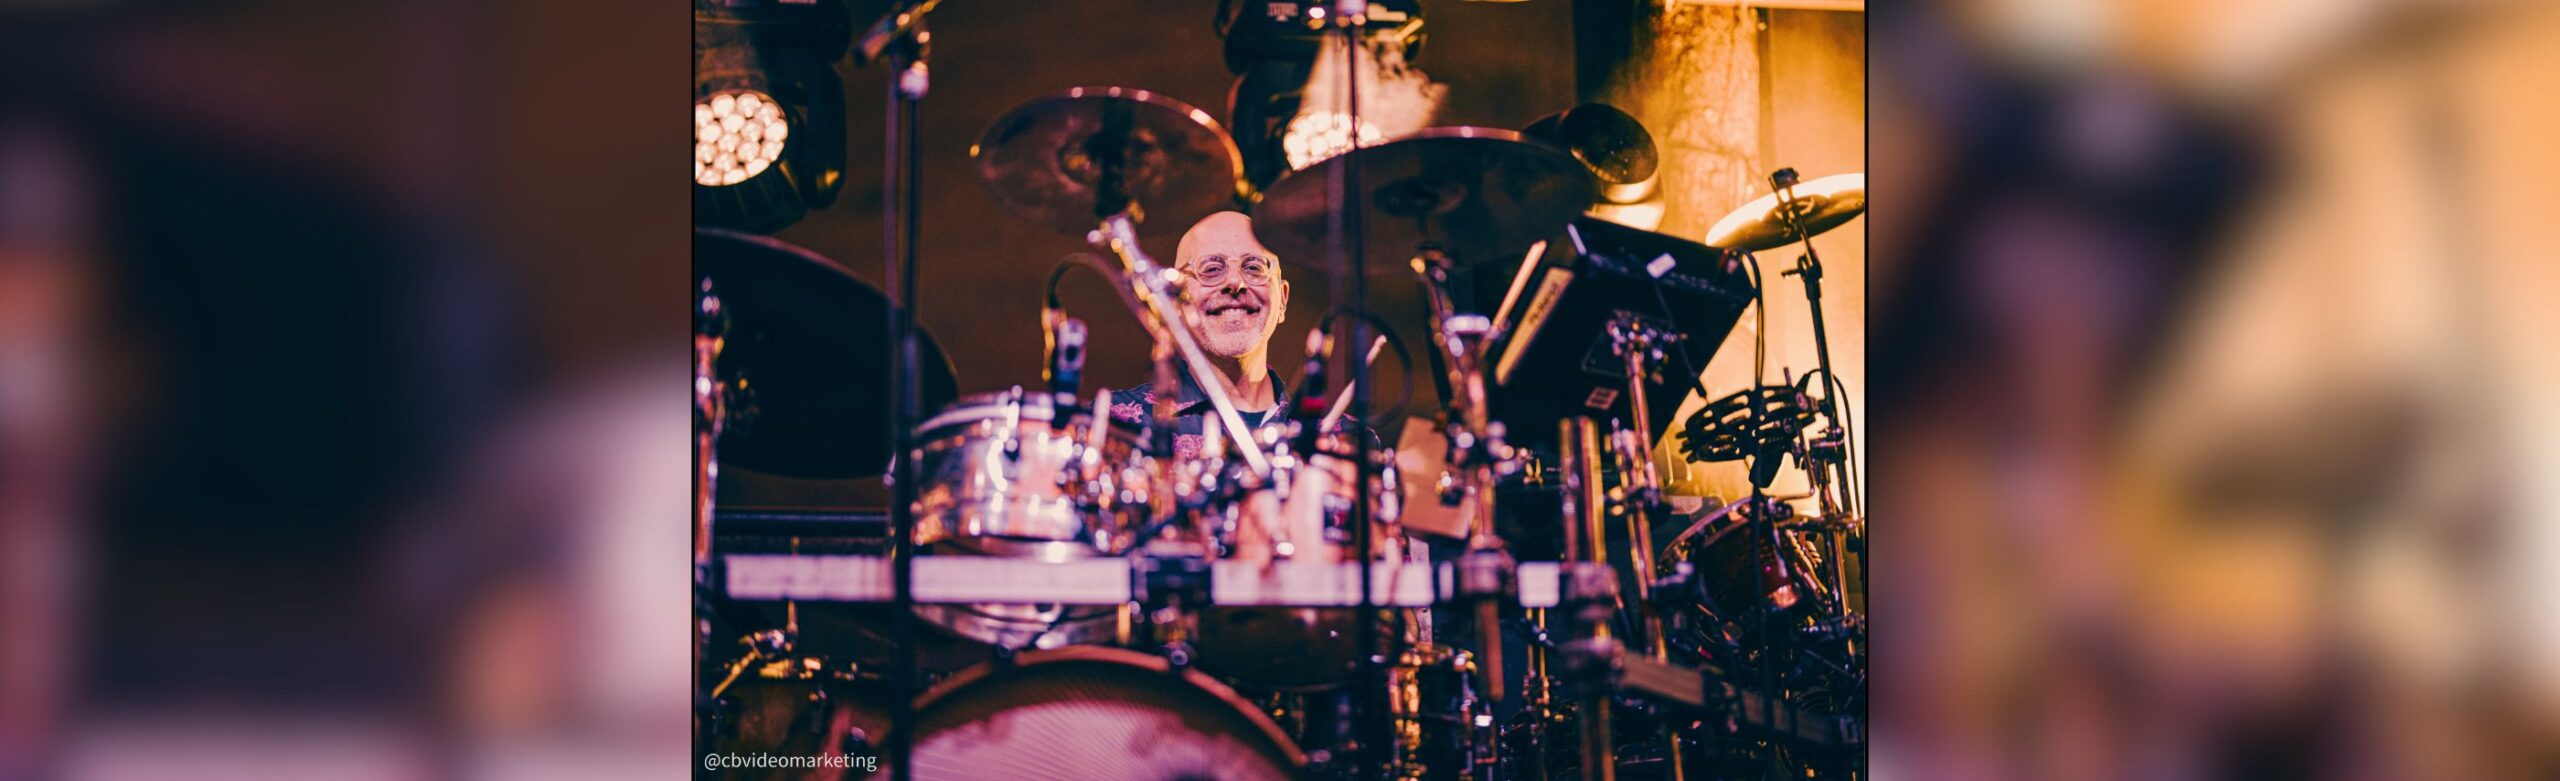 Drummer Mike Greenfield of Lotus to Join Umphrey’s McGee in Montana Image